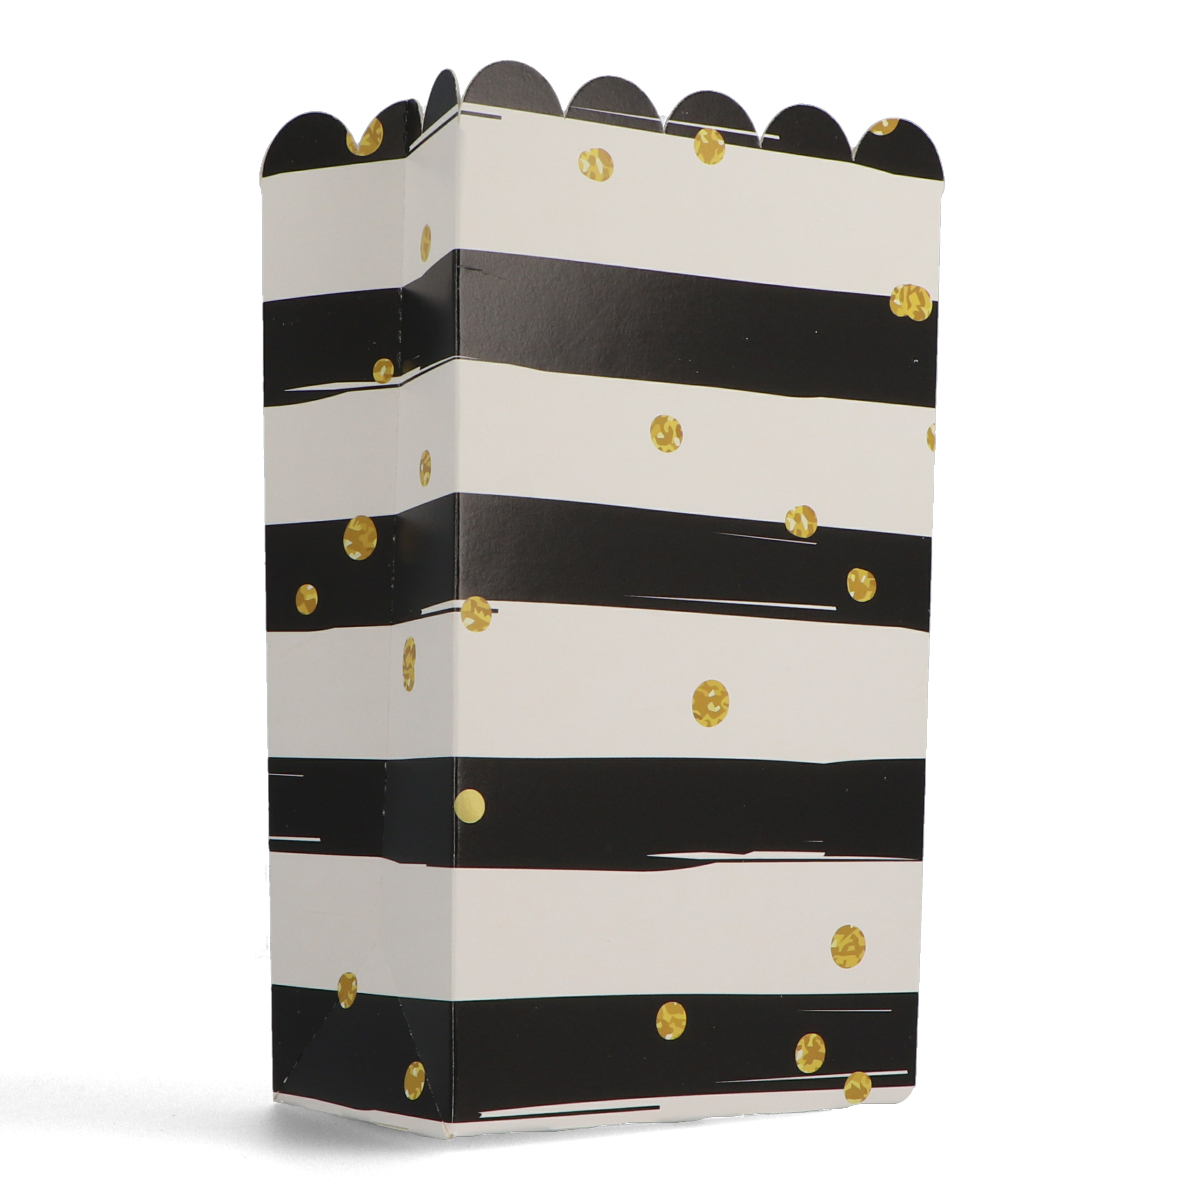 Popcorn bag printed with gold dots and black stripes